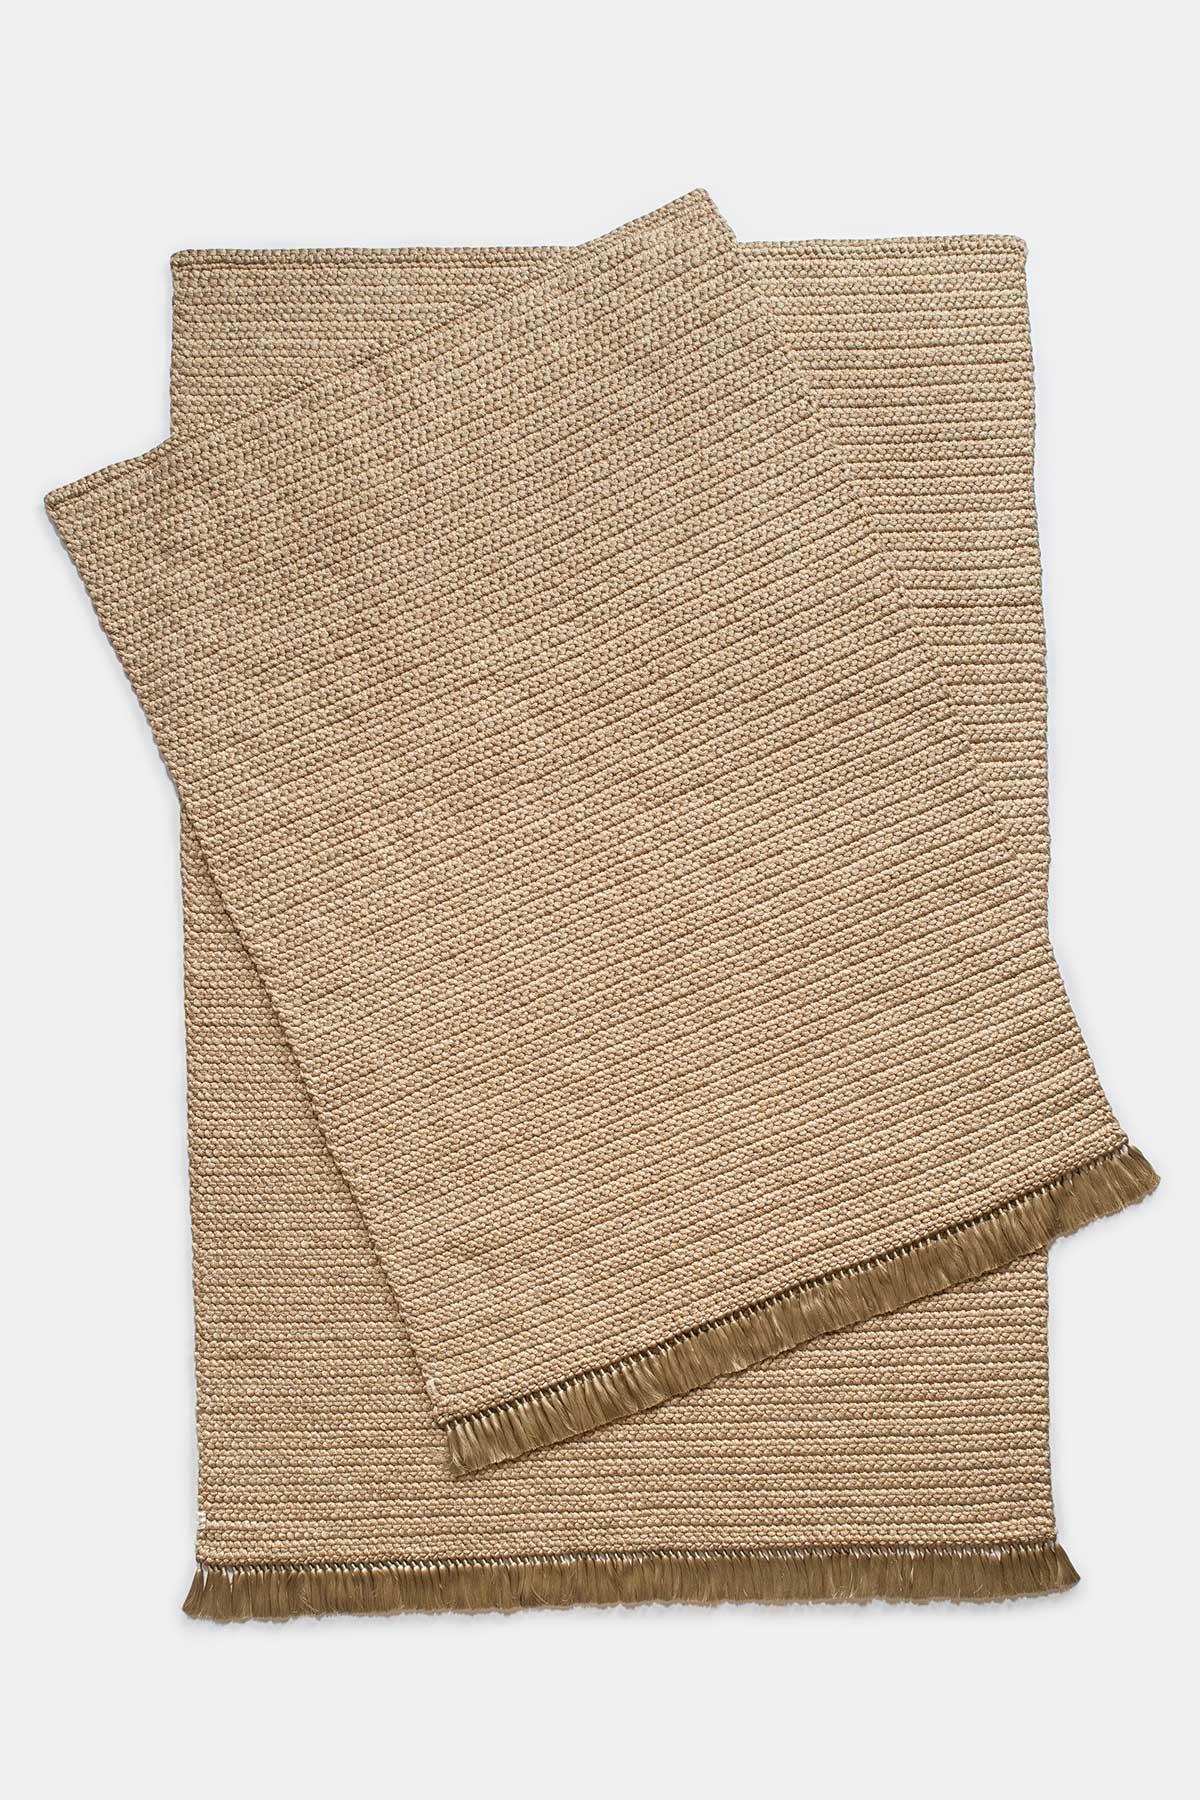 Hand-Crafted Handmade Crochet Thick Rug in Golden Beige Pink Made of Cotton & Polyester For Sale